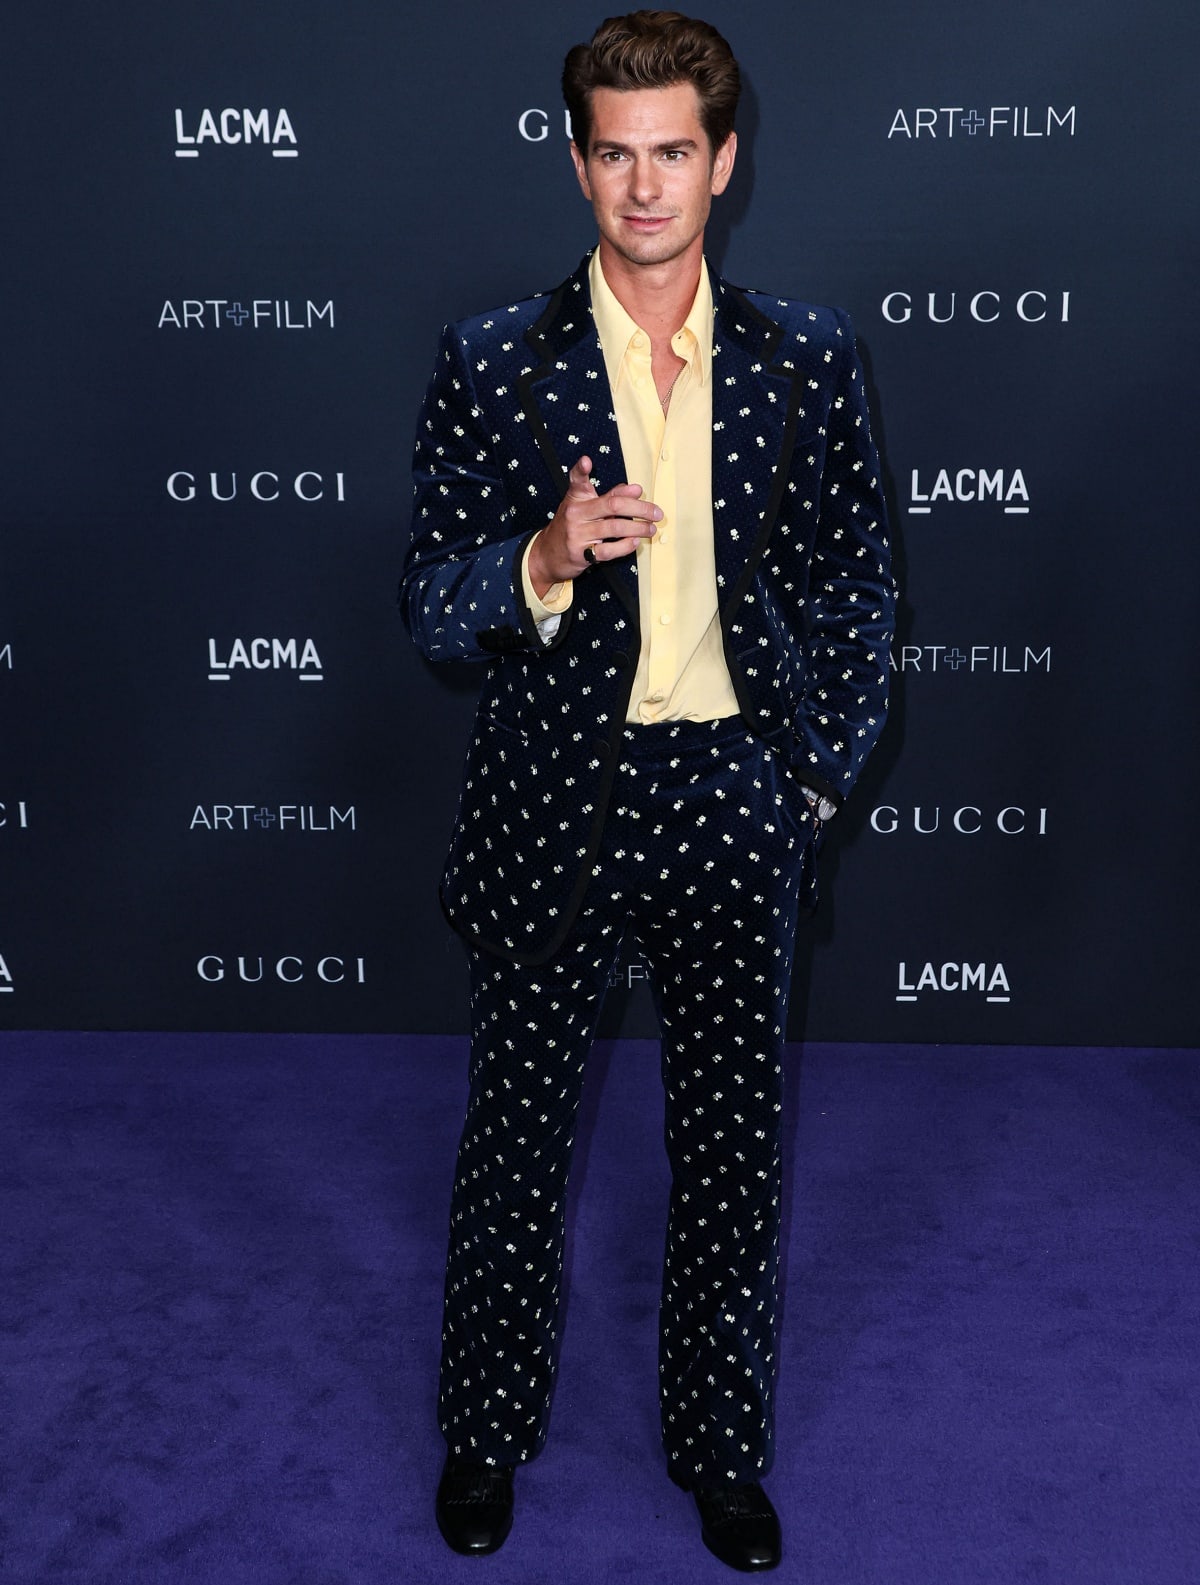 Andrew Garfield standing out in a Gucci floral-embellished velvet suit with a yellow shirt and black dress shoes at the 11th Annual LACMA Art + Film Gala